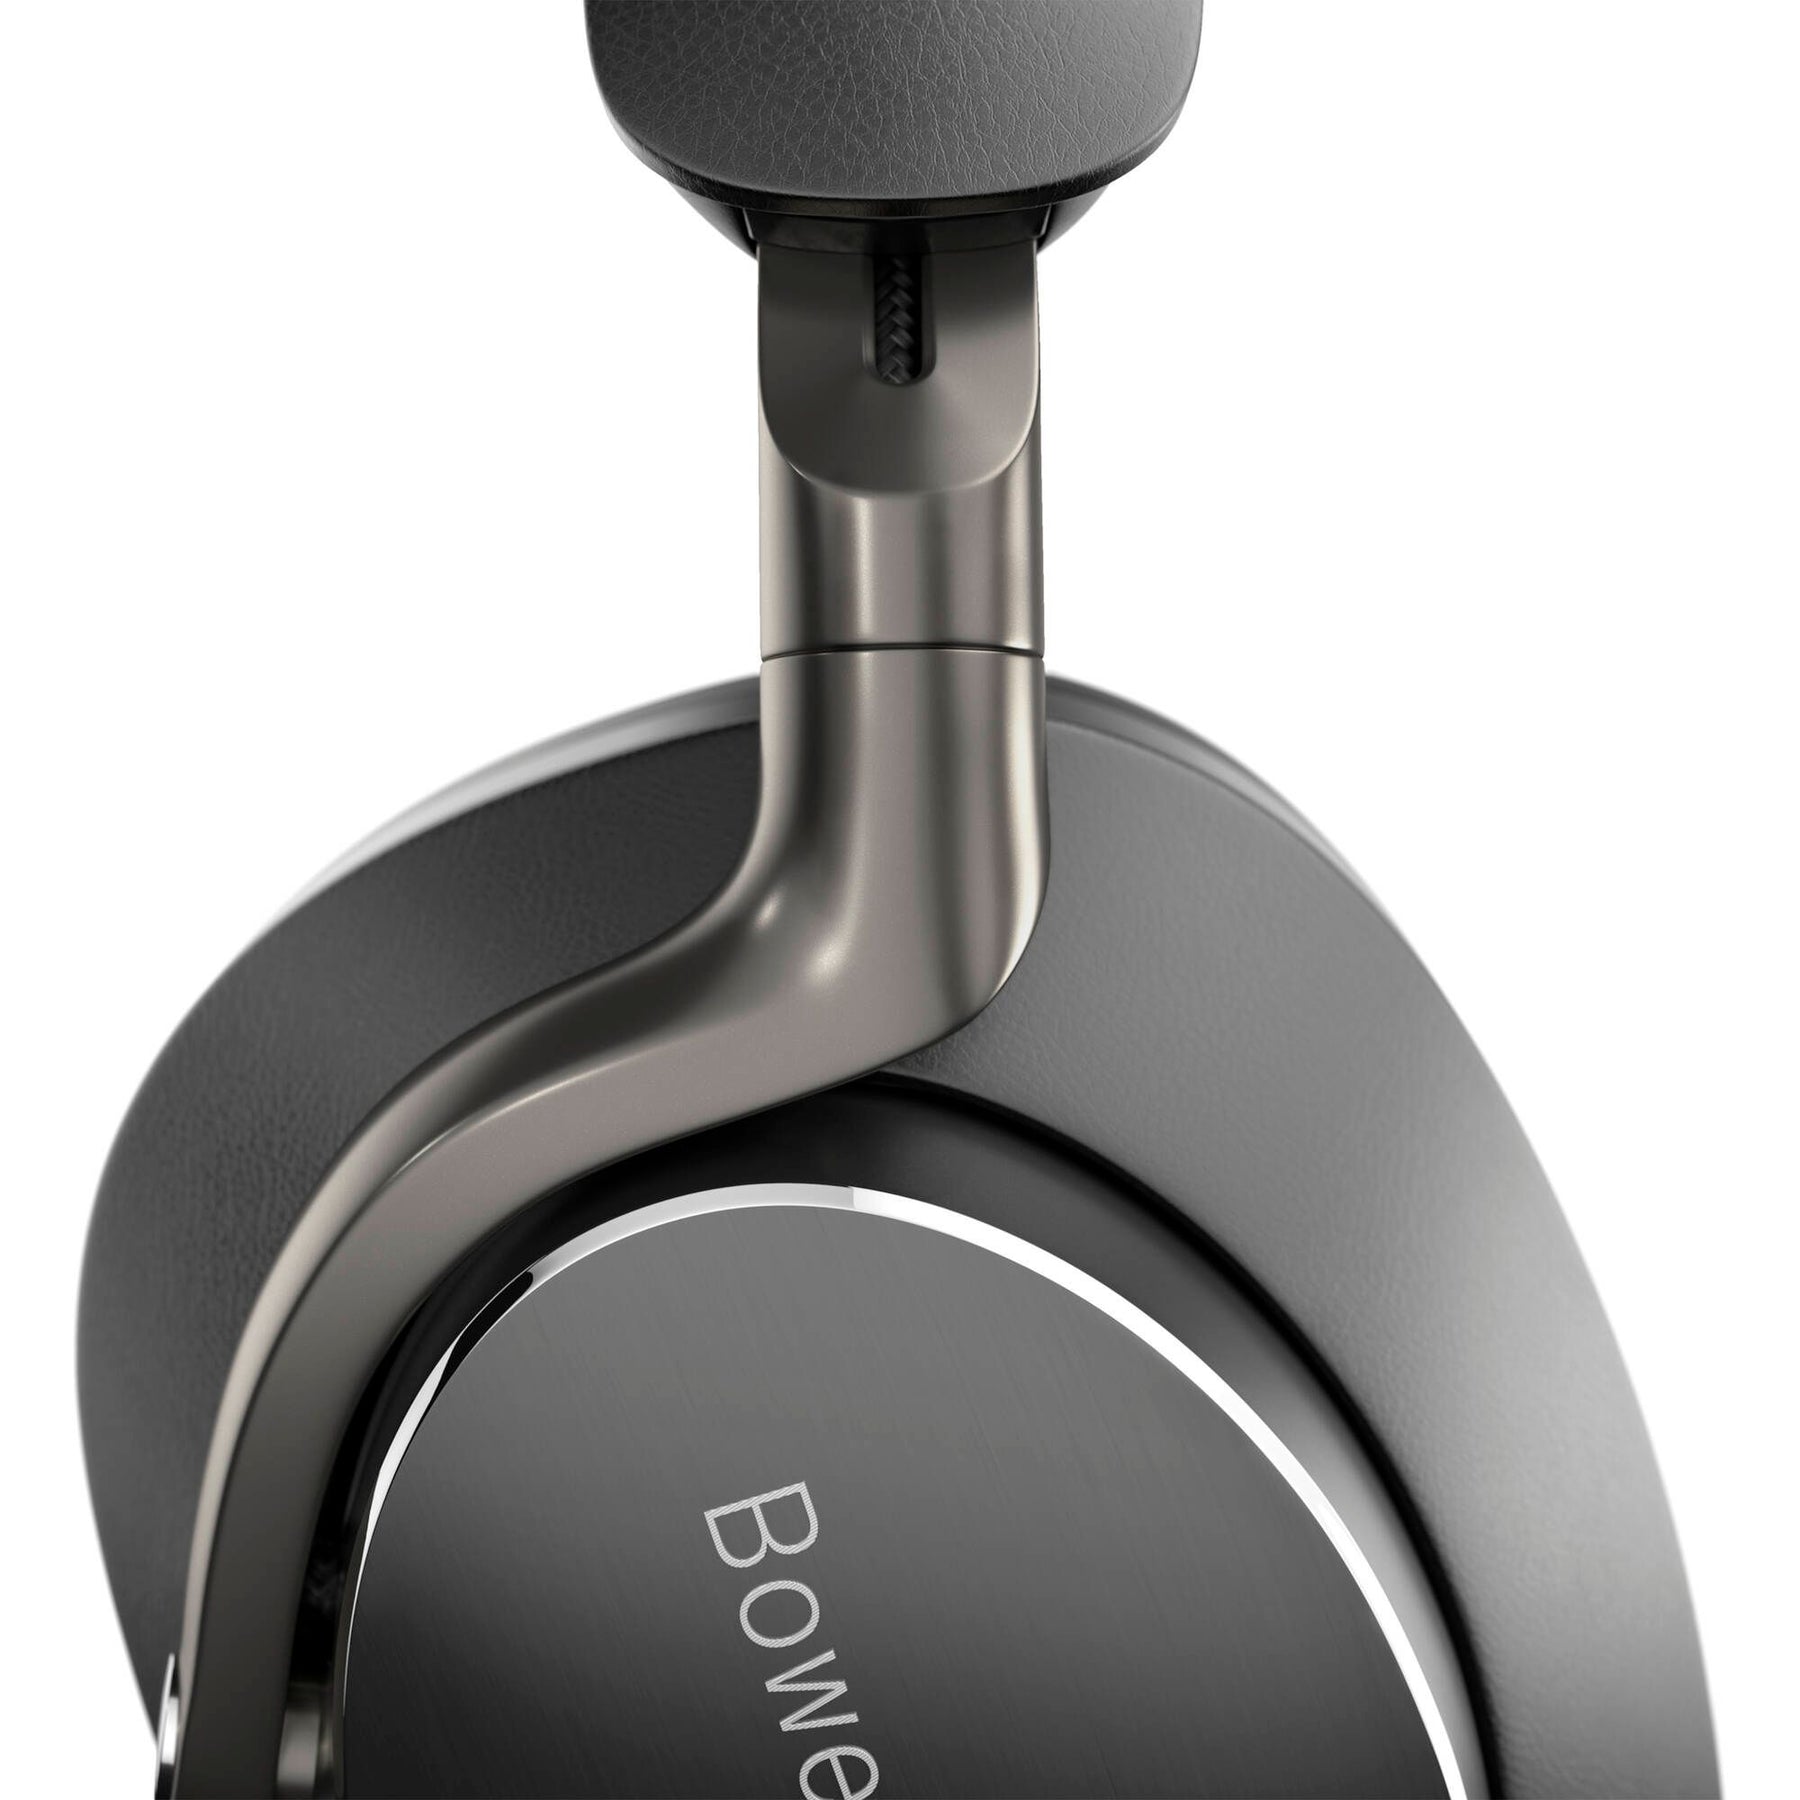 Bowers & Wilkins Px8 Headphones Review: Premium Sound and Materials